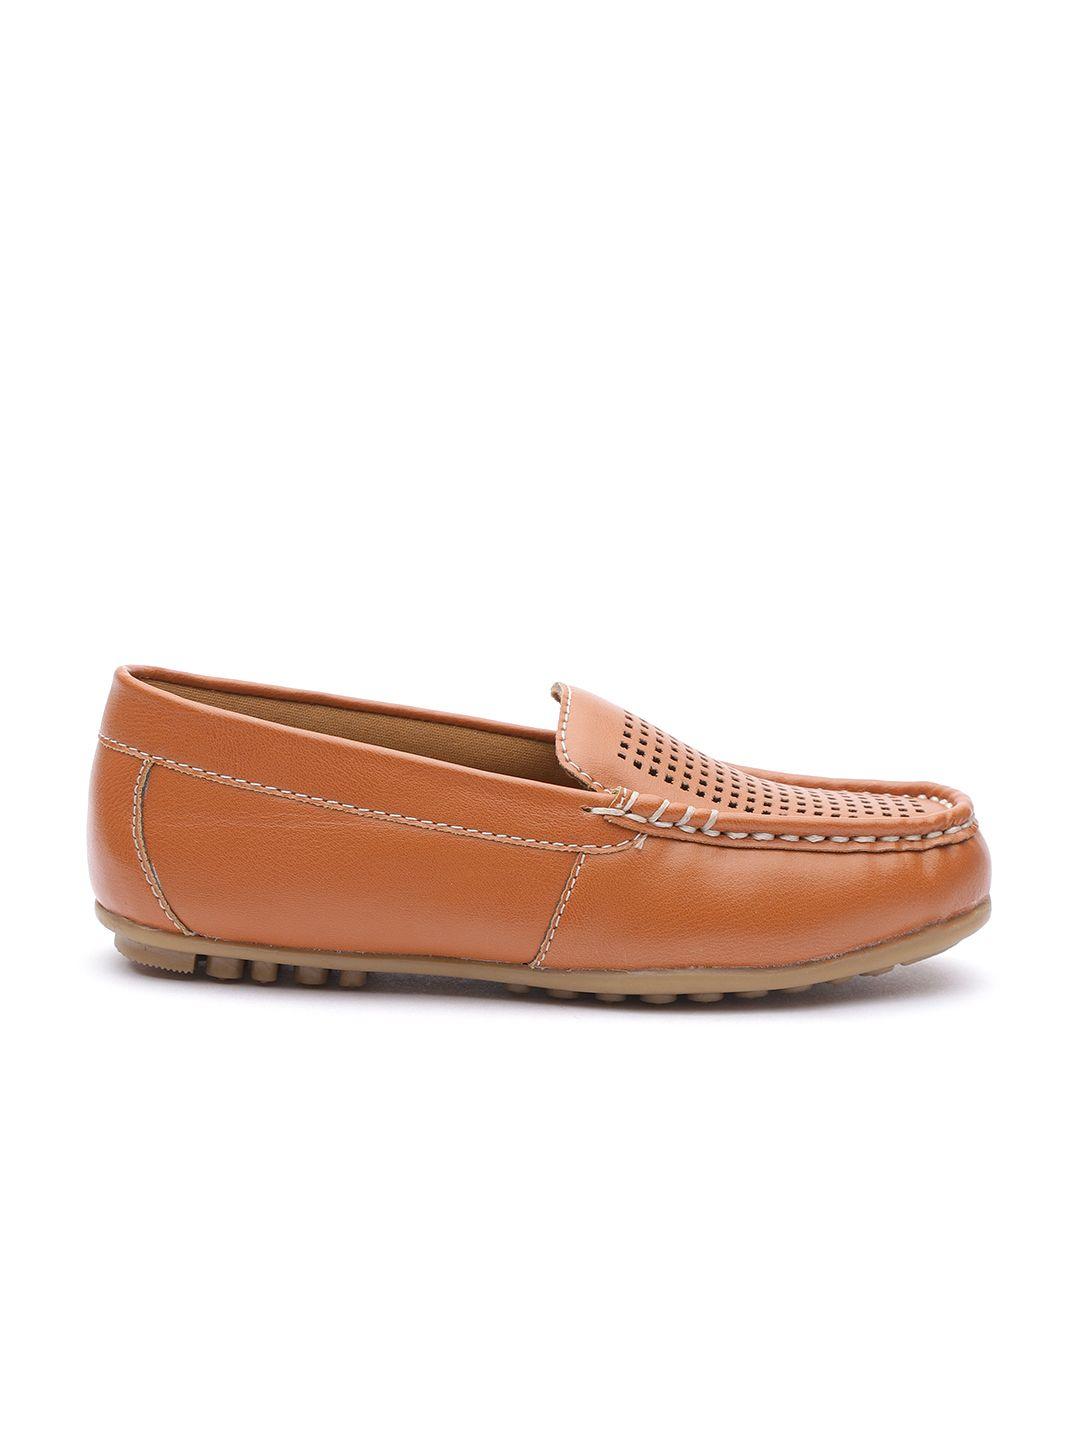 carlton london boys brown loafers with laser cuts